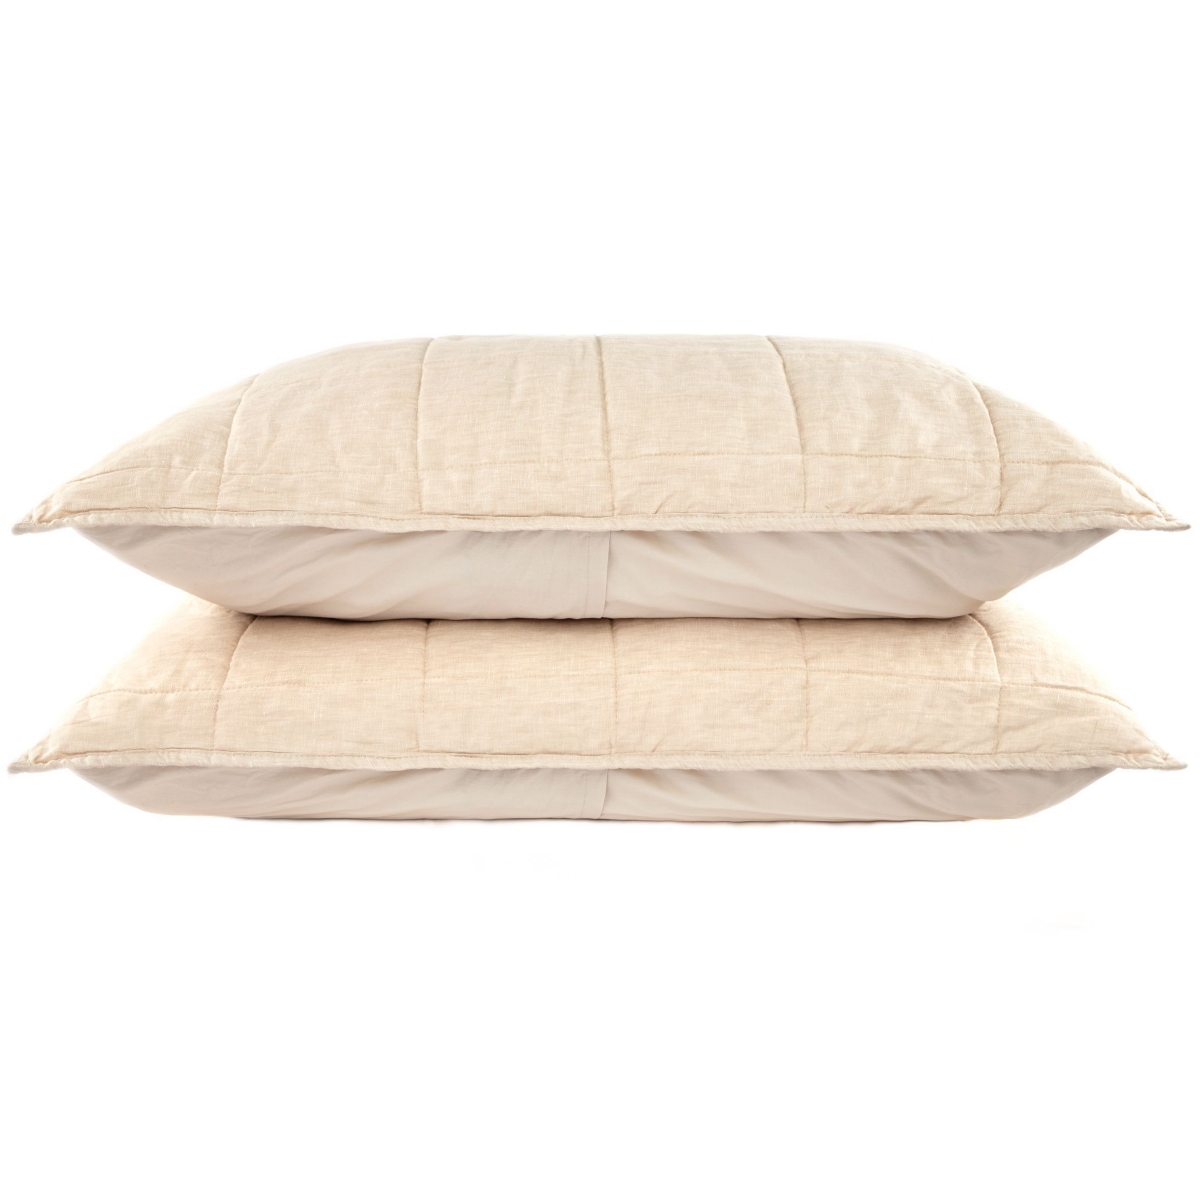 French Linen Quilted Sham Set - King - Baltic